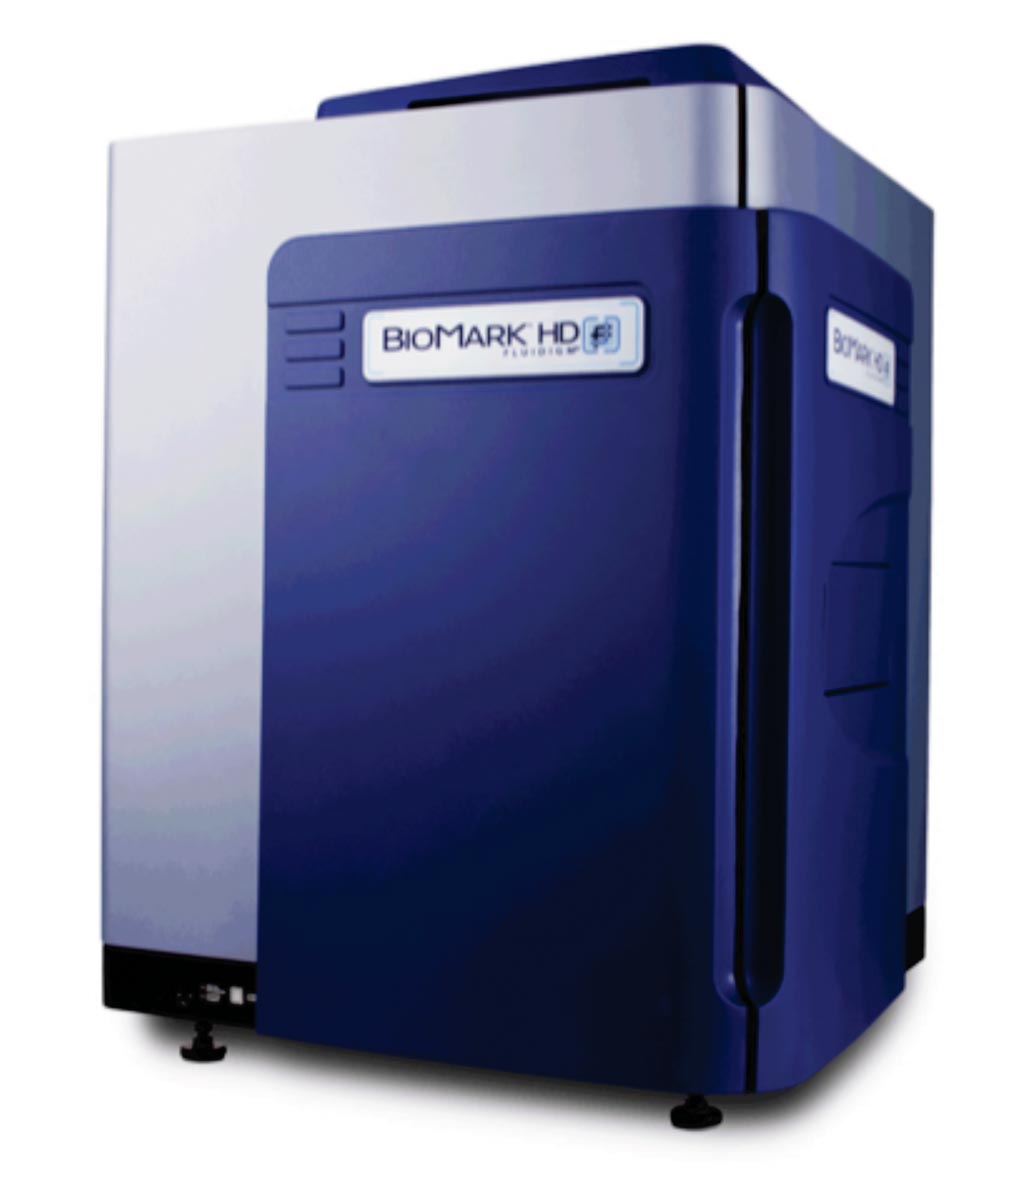 Image: The BioMark HD real-time polymerase chain reaction (PCR) platform (Photo courtesy of Fluidigm).